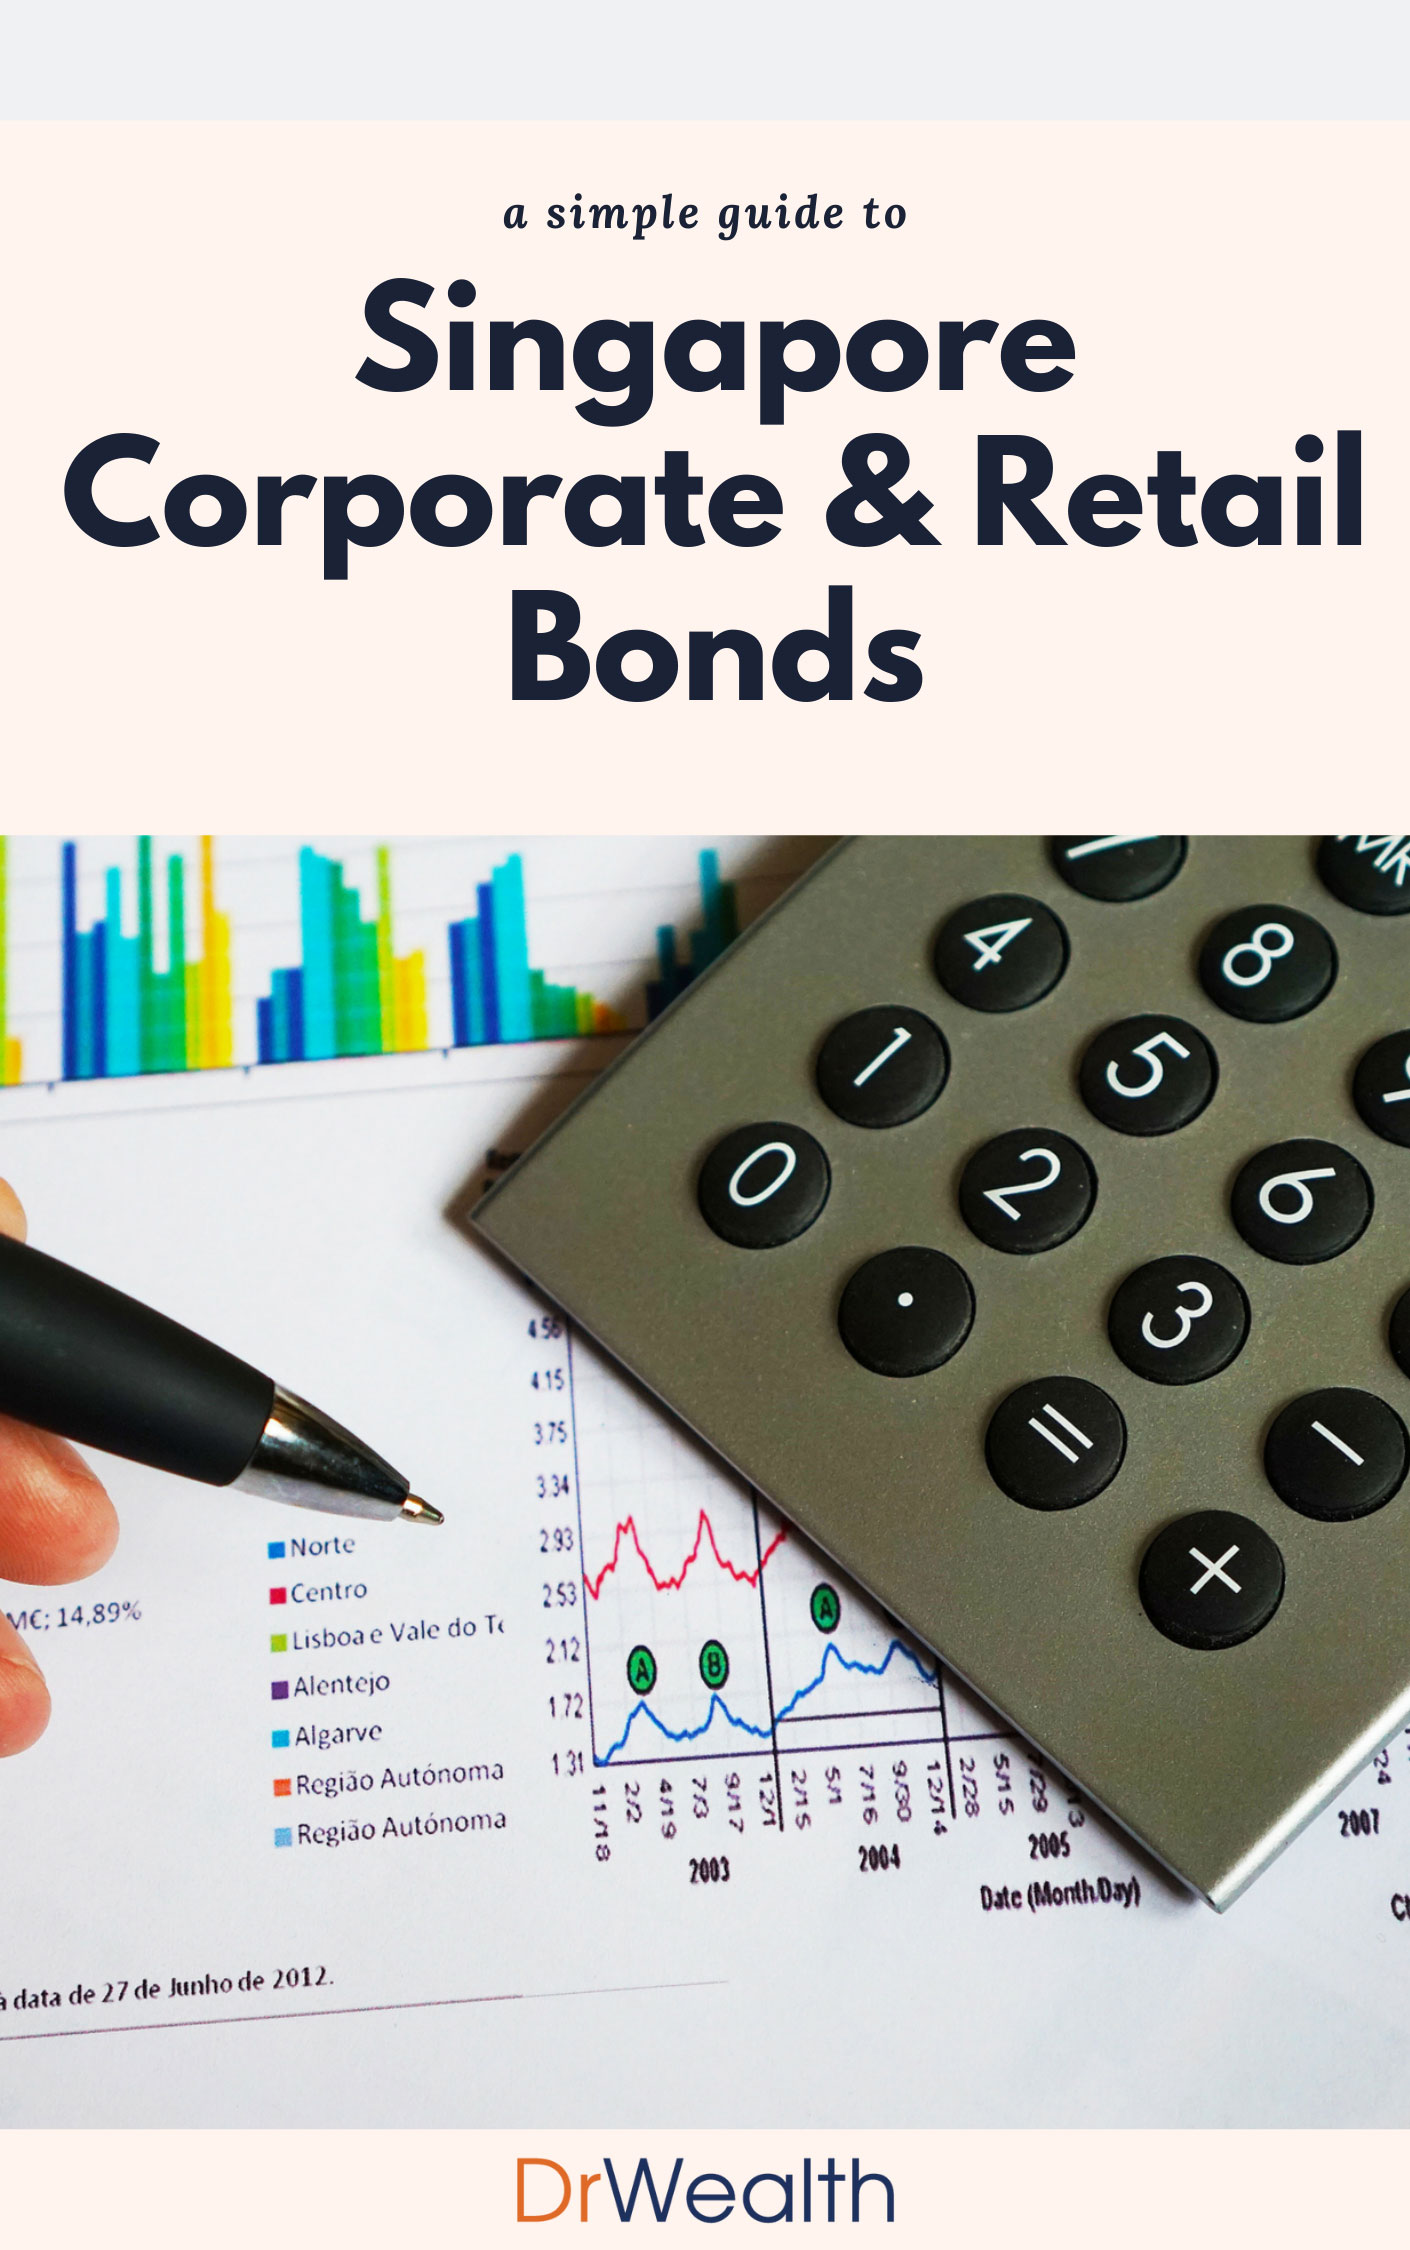 Simple guide to Singapore Corporate and Retail Bonds